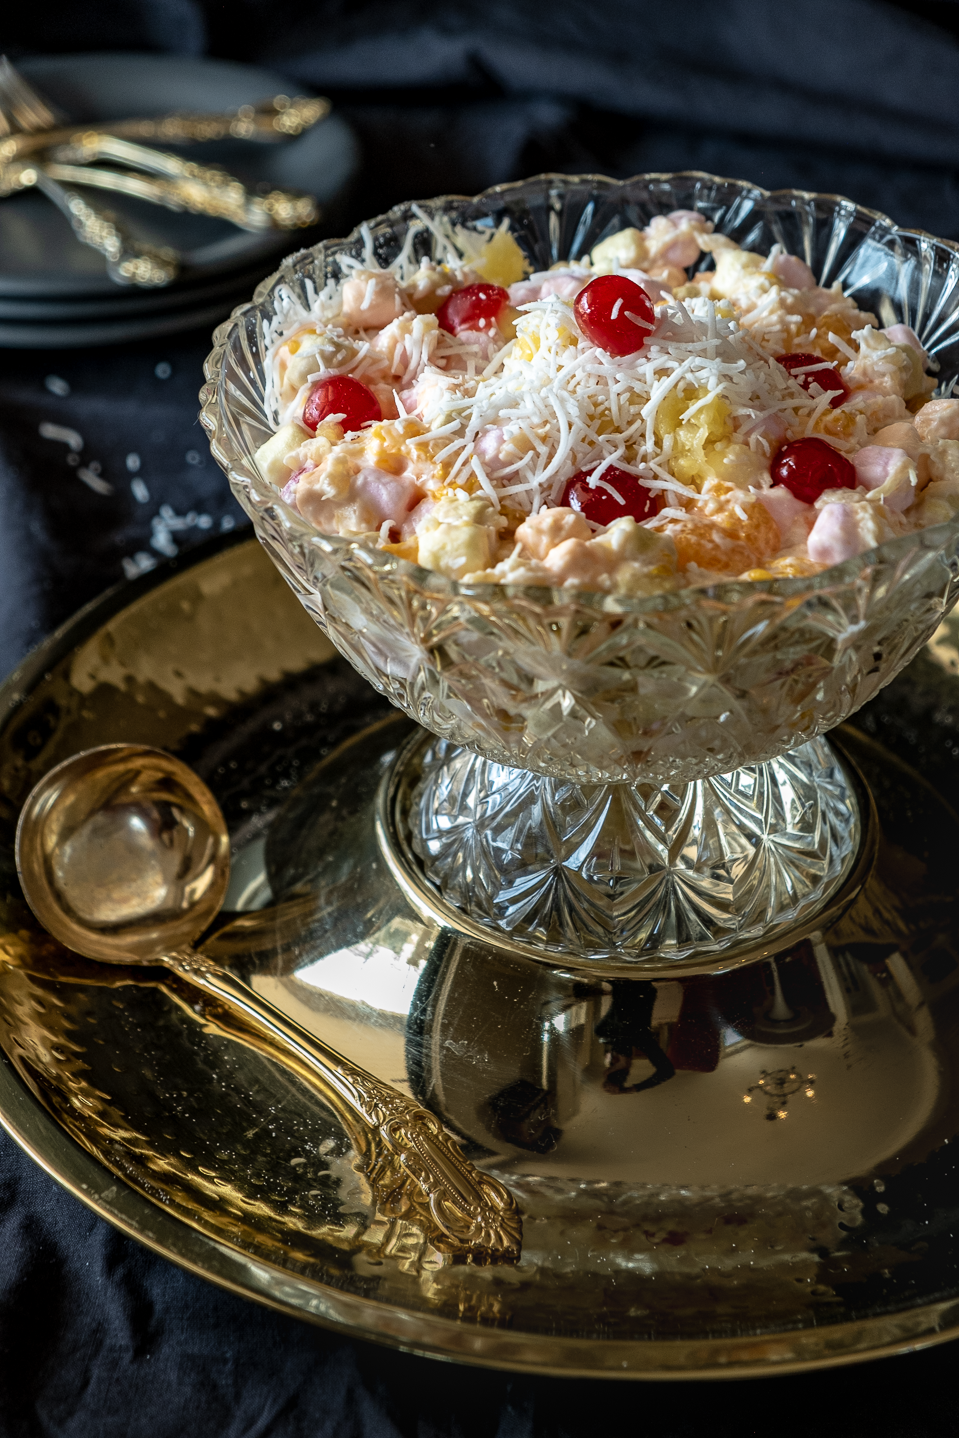 Marshmallow Salad topped with coconut and maraschino cherries in a cut glass bowl.